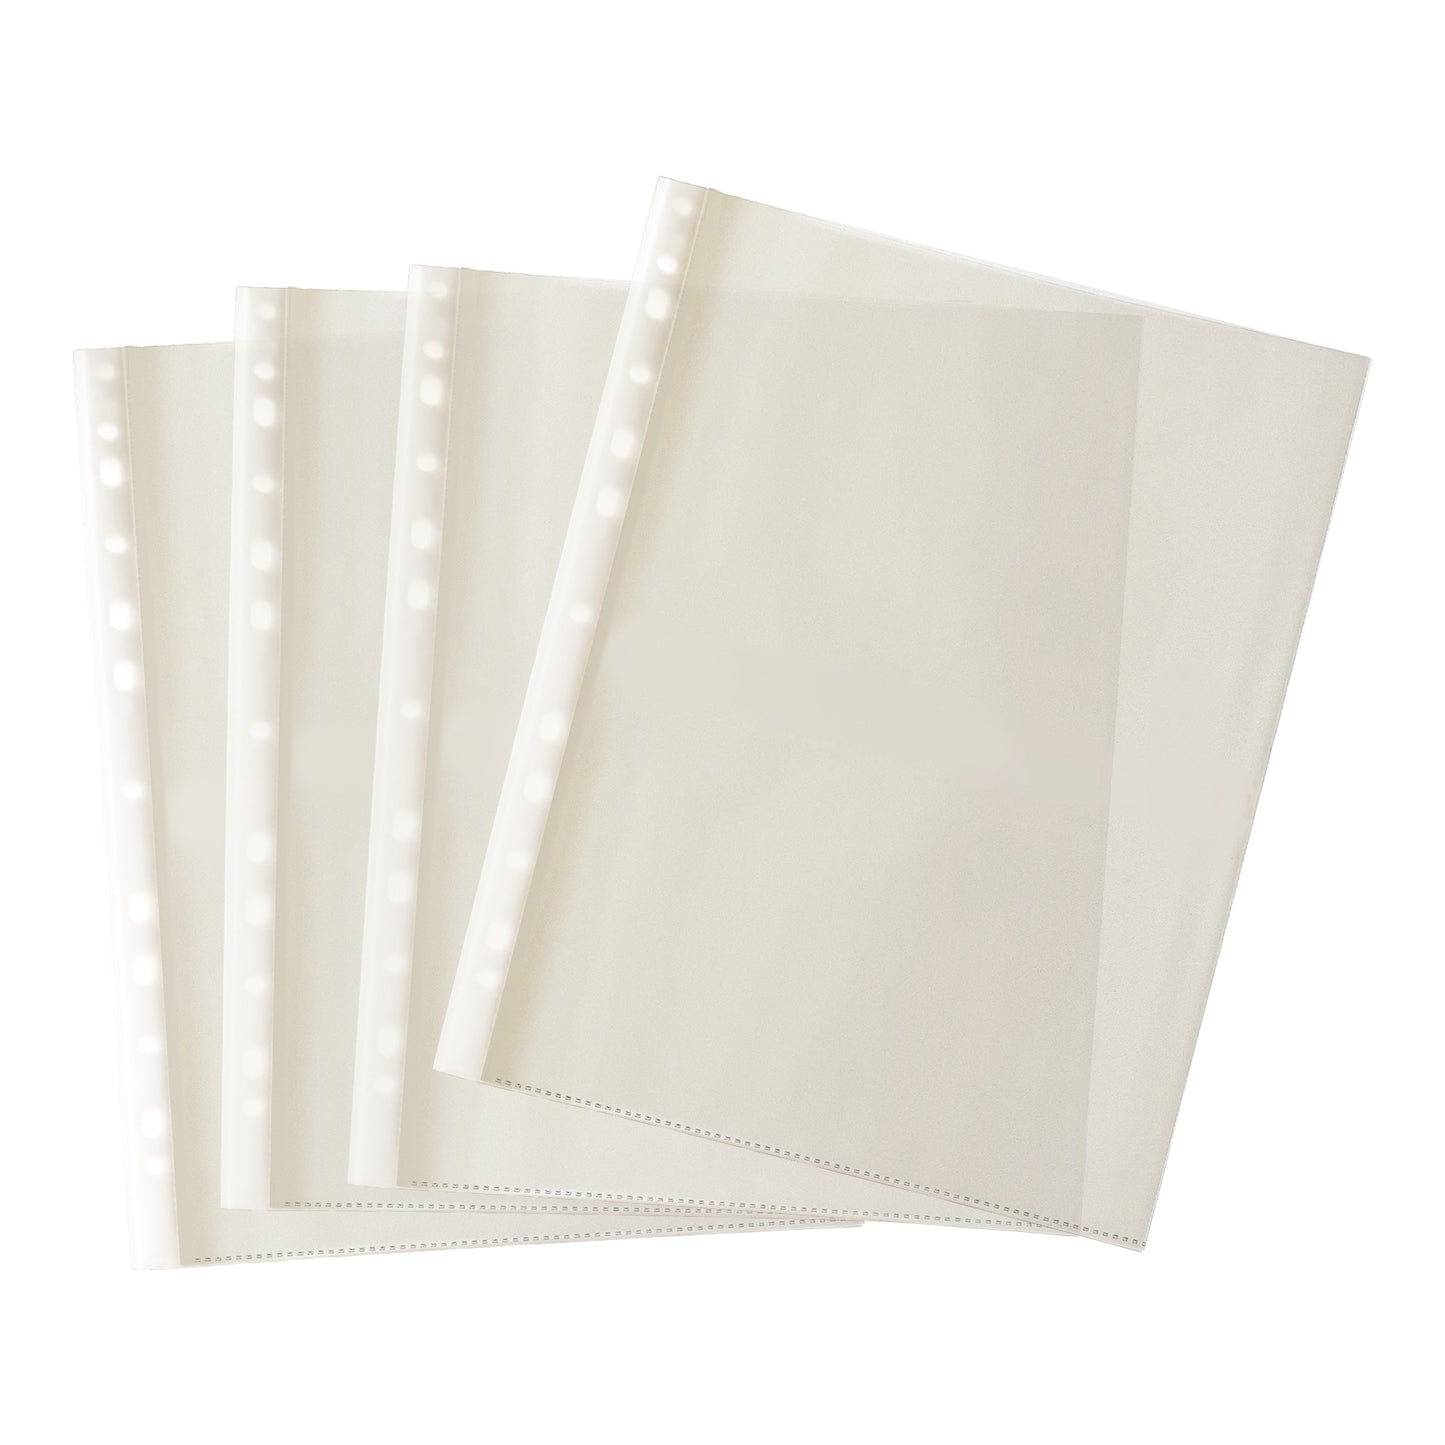 Pack of 100 A4 Glass Clear Punched Pockets by Janrax